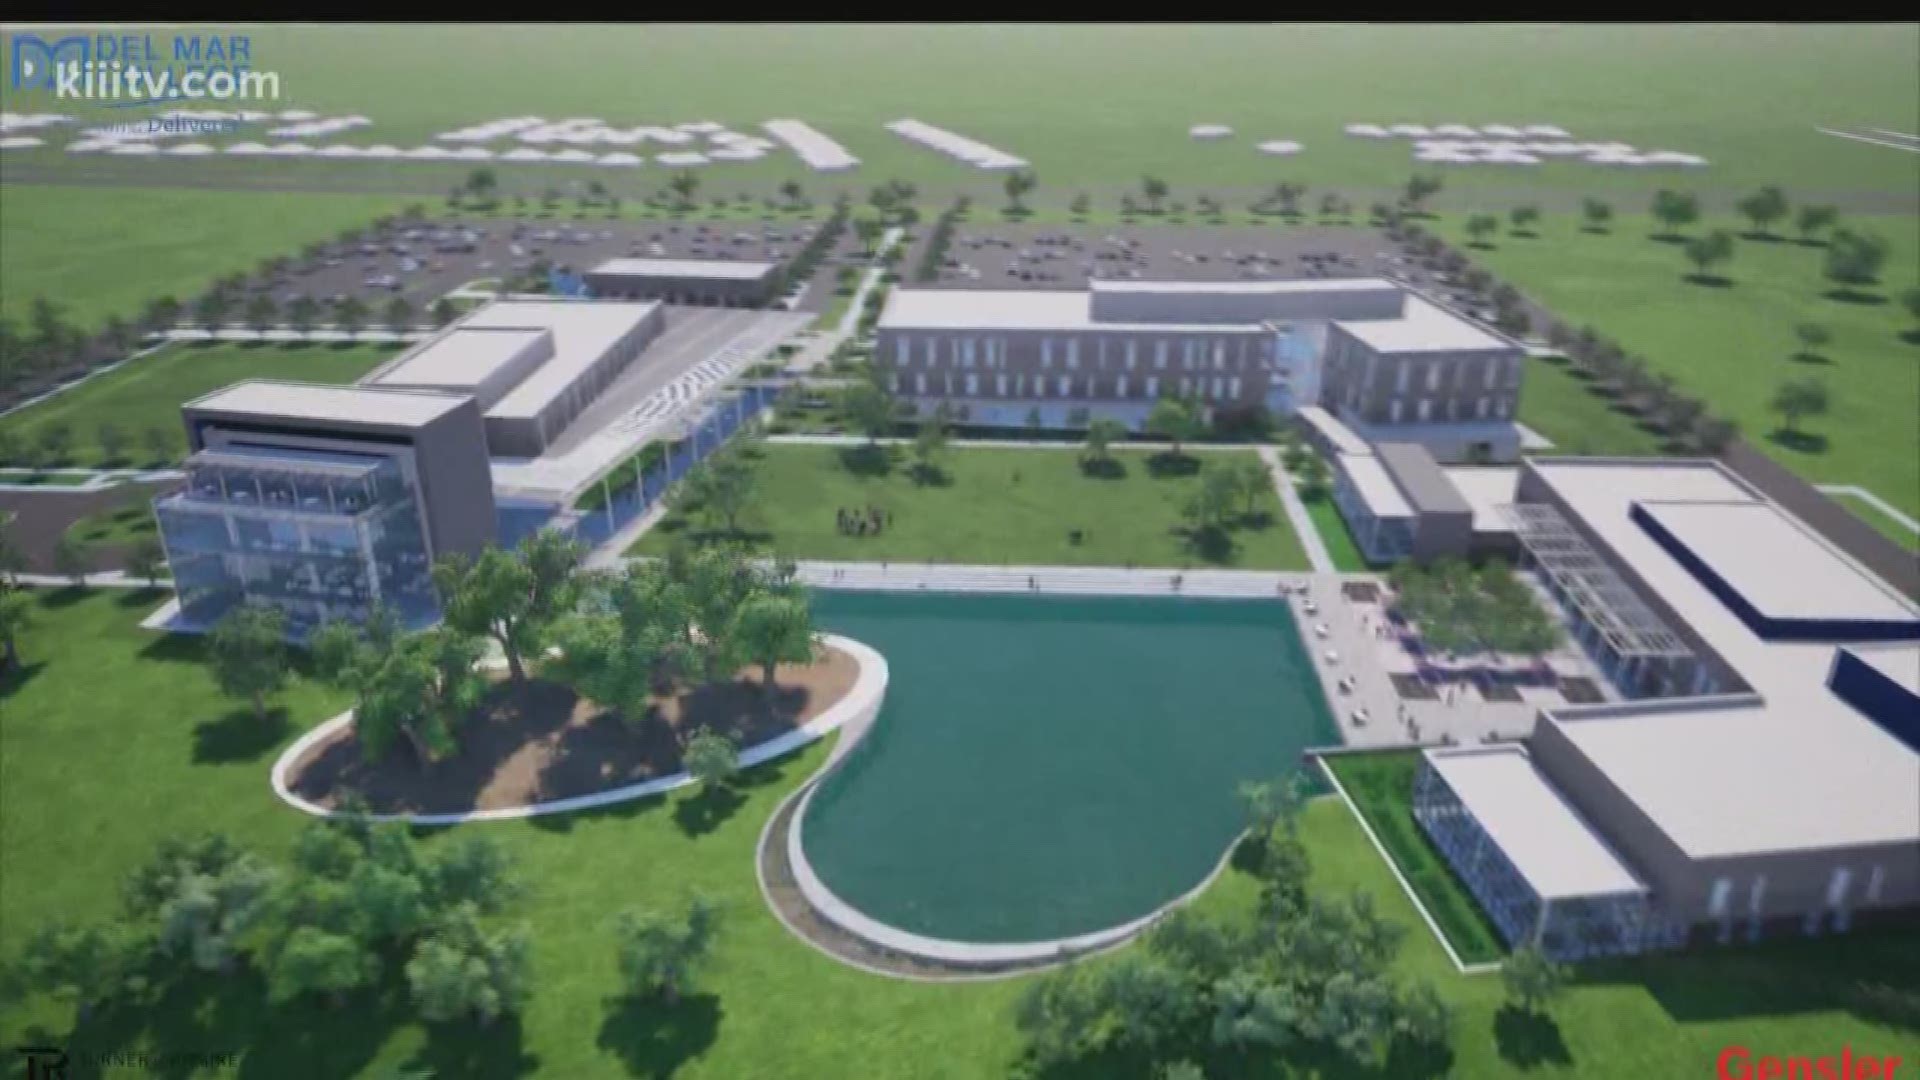 Regents want the new southside campus to help propel students into the future of education.